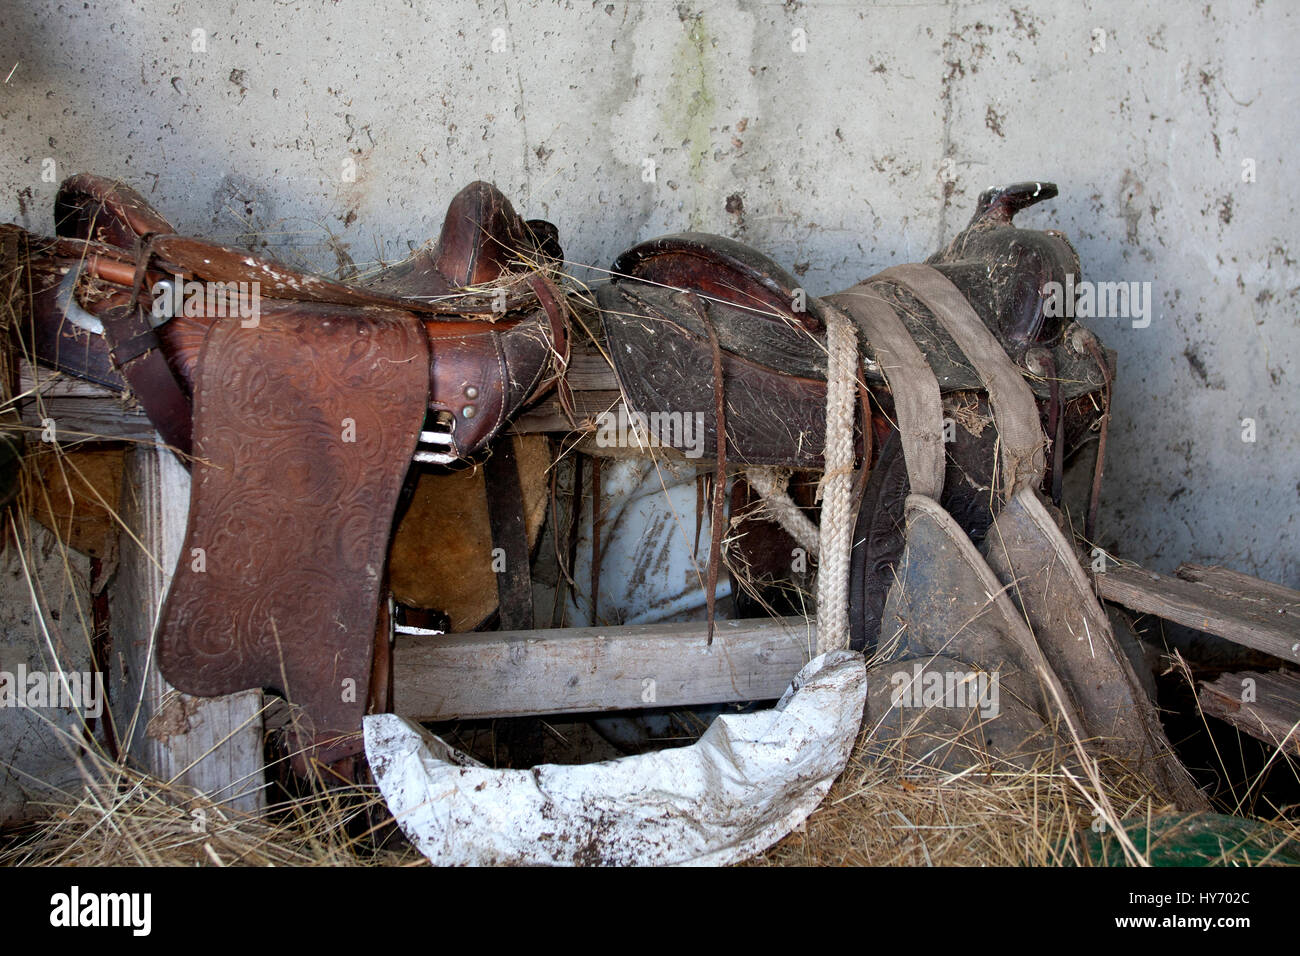 A pair of old saddles collecting dust Stock Photo